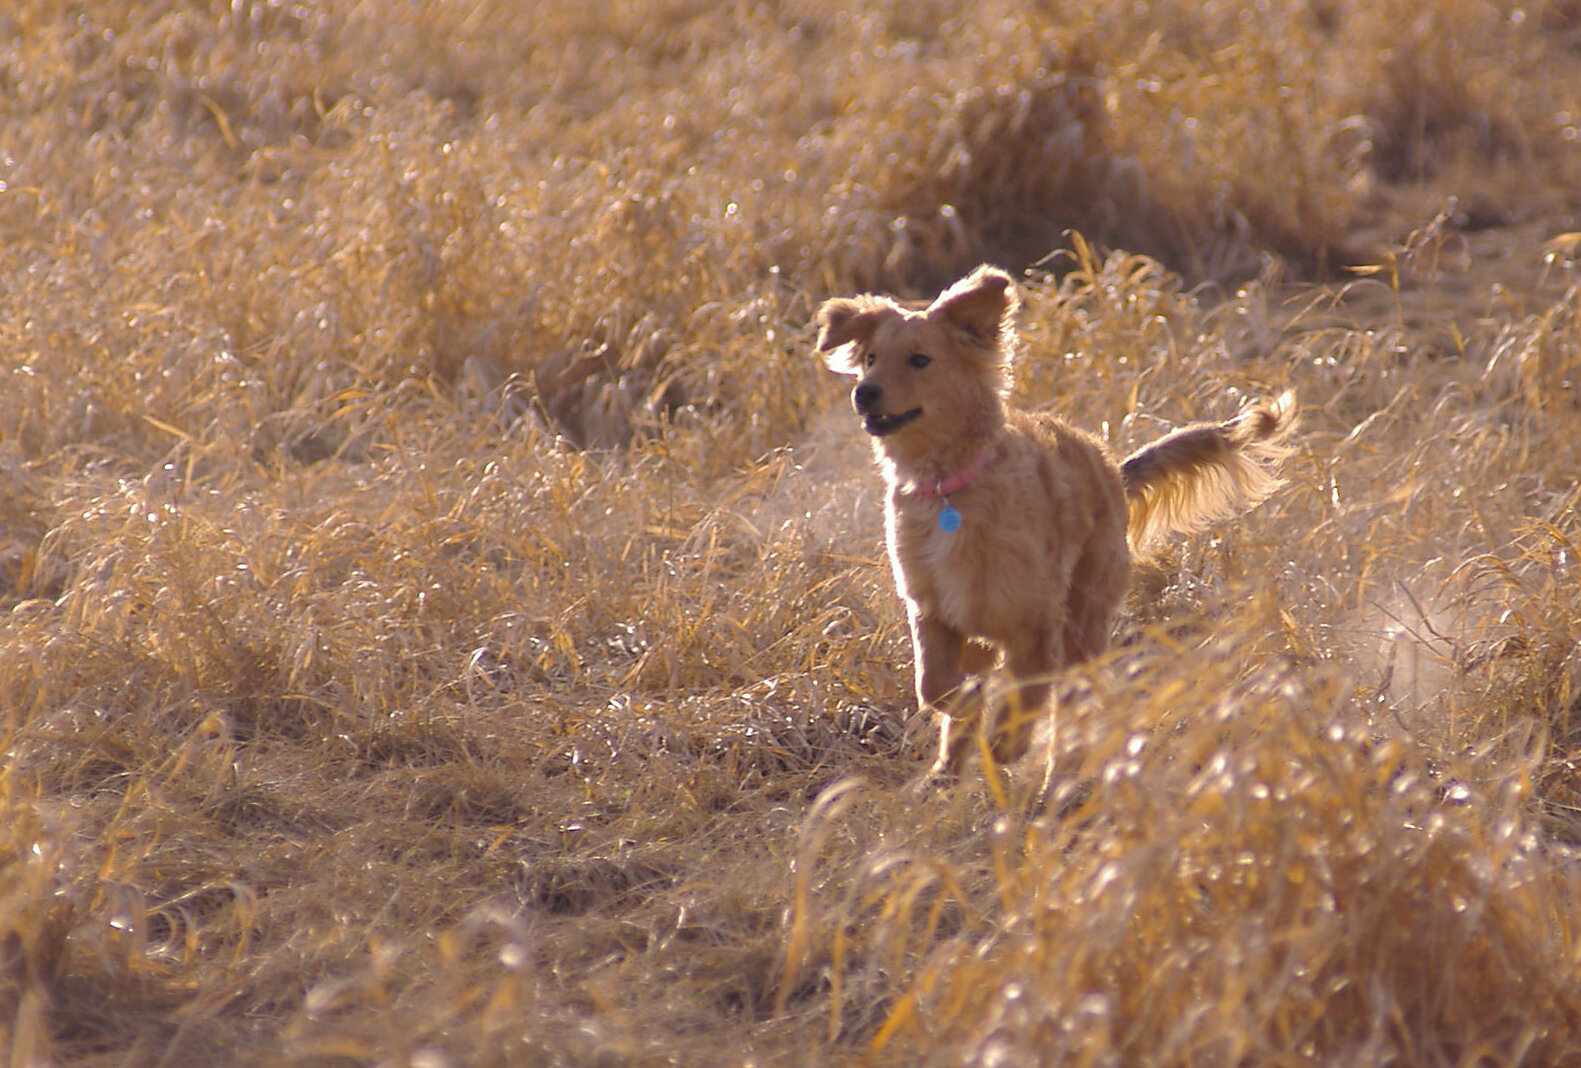 Holly at a full run at one of the local dog parks. She certainly loved running free through the tall grasses.